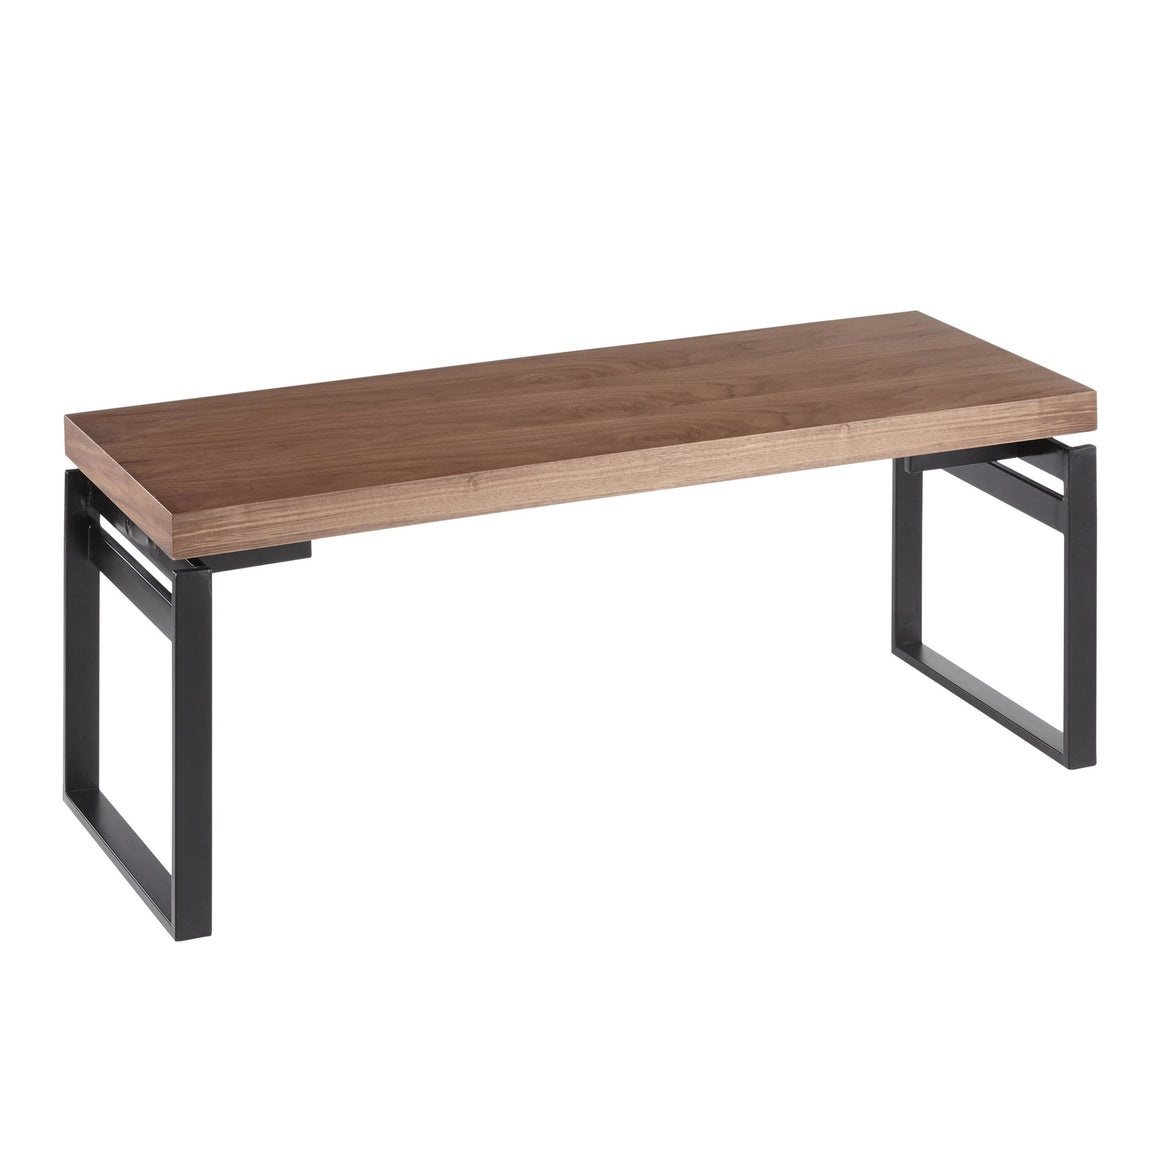 Drift Industrial Bench in Black Metal and Walnut Wood by LumiSource